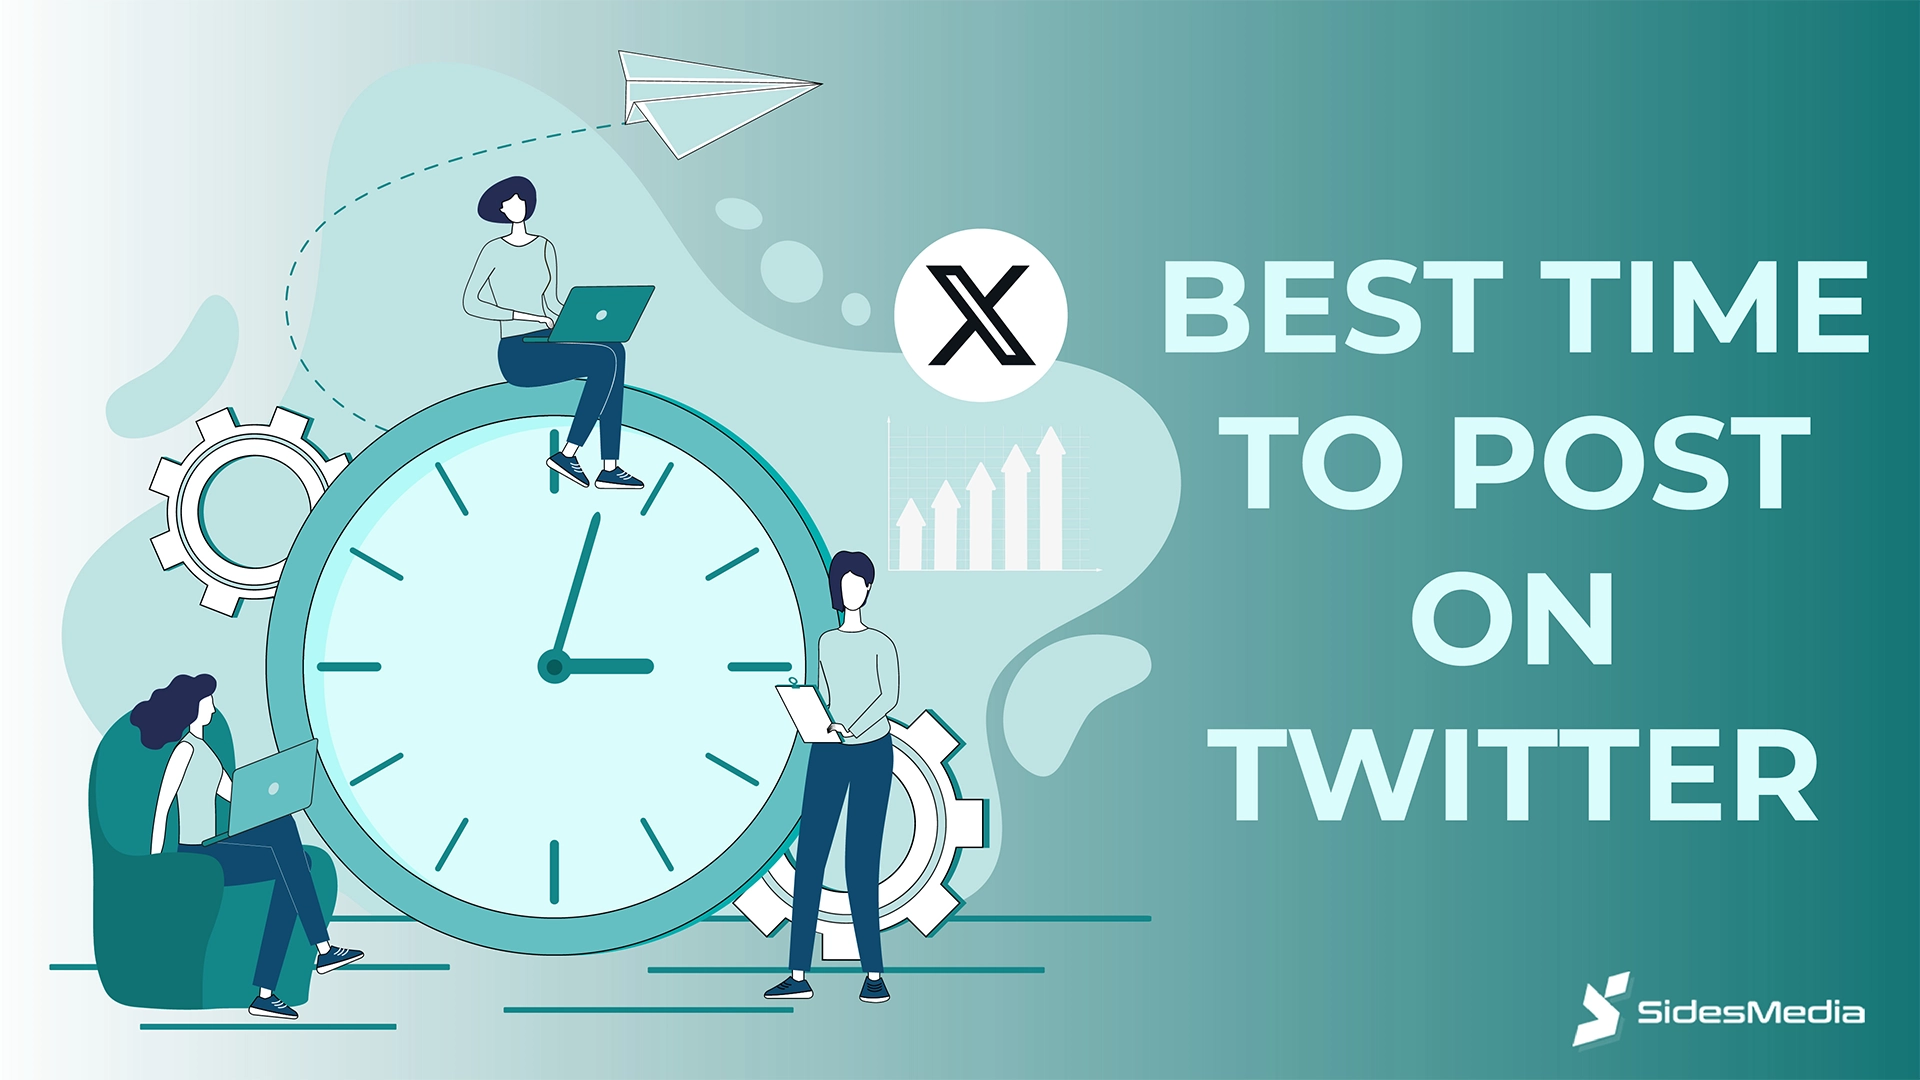 When Is the Best Time to Post on Twitter